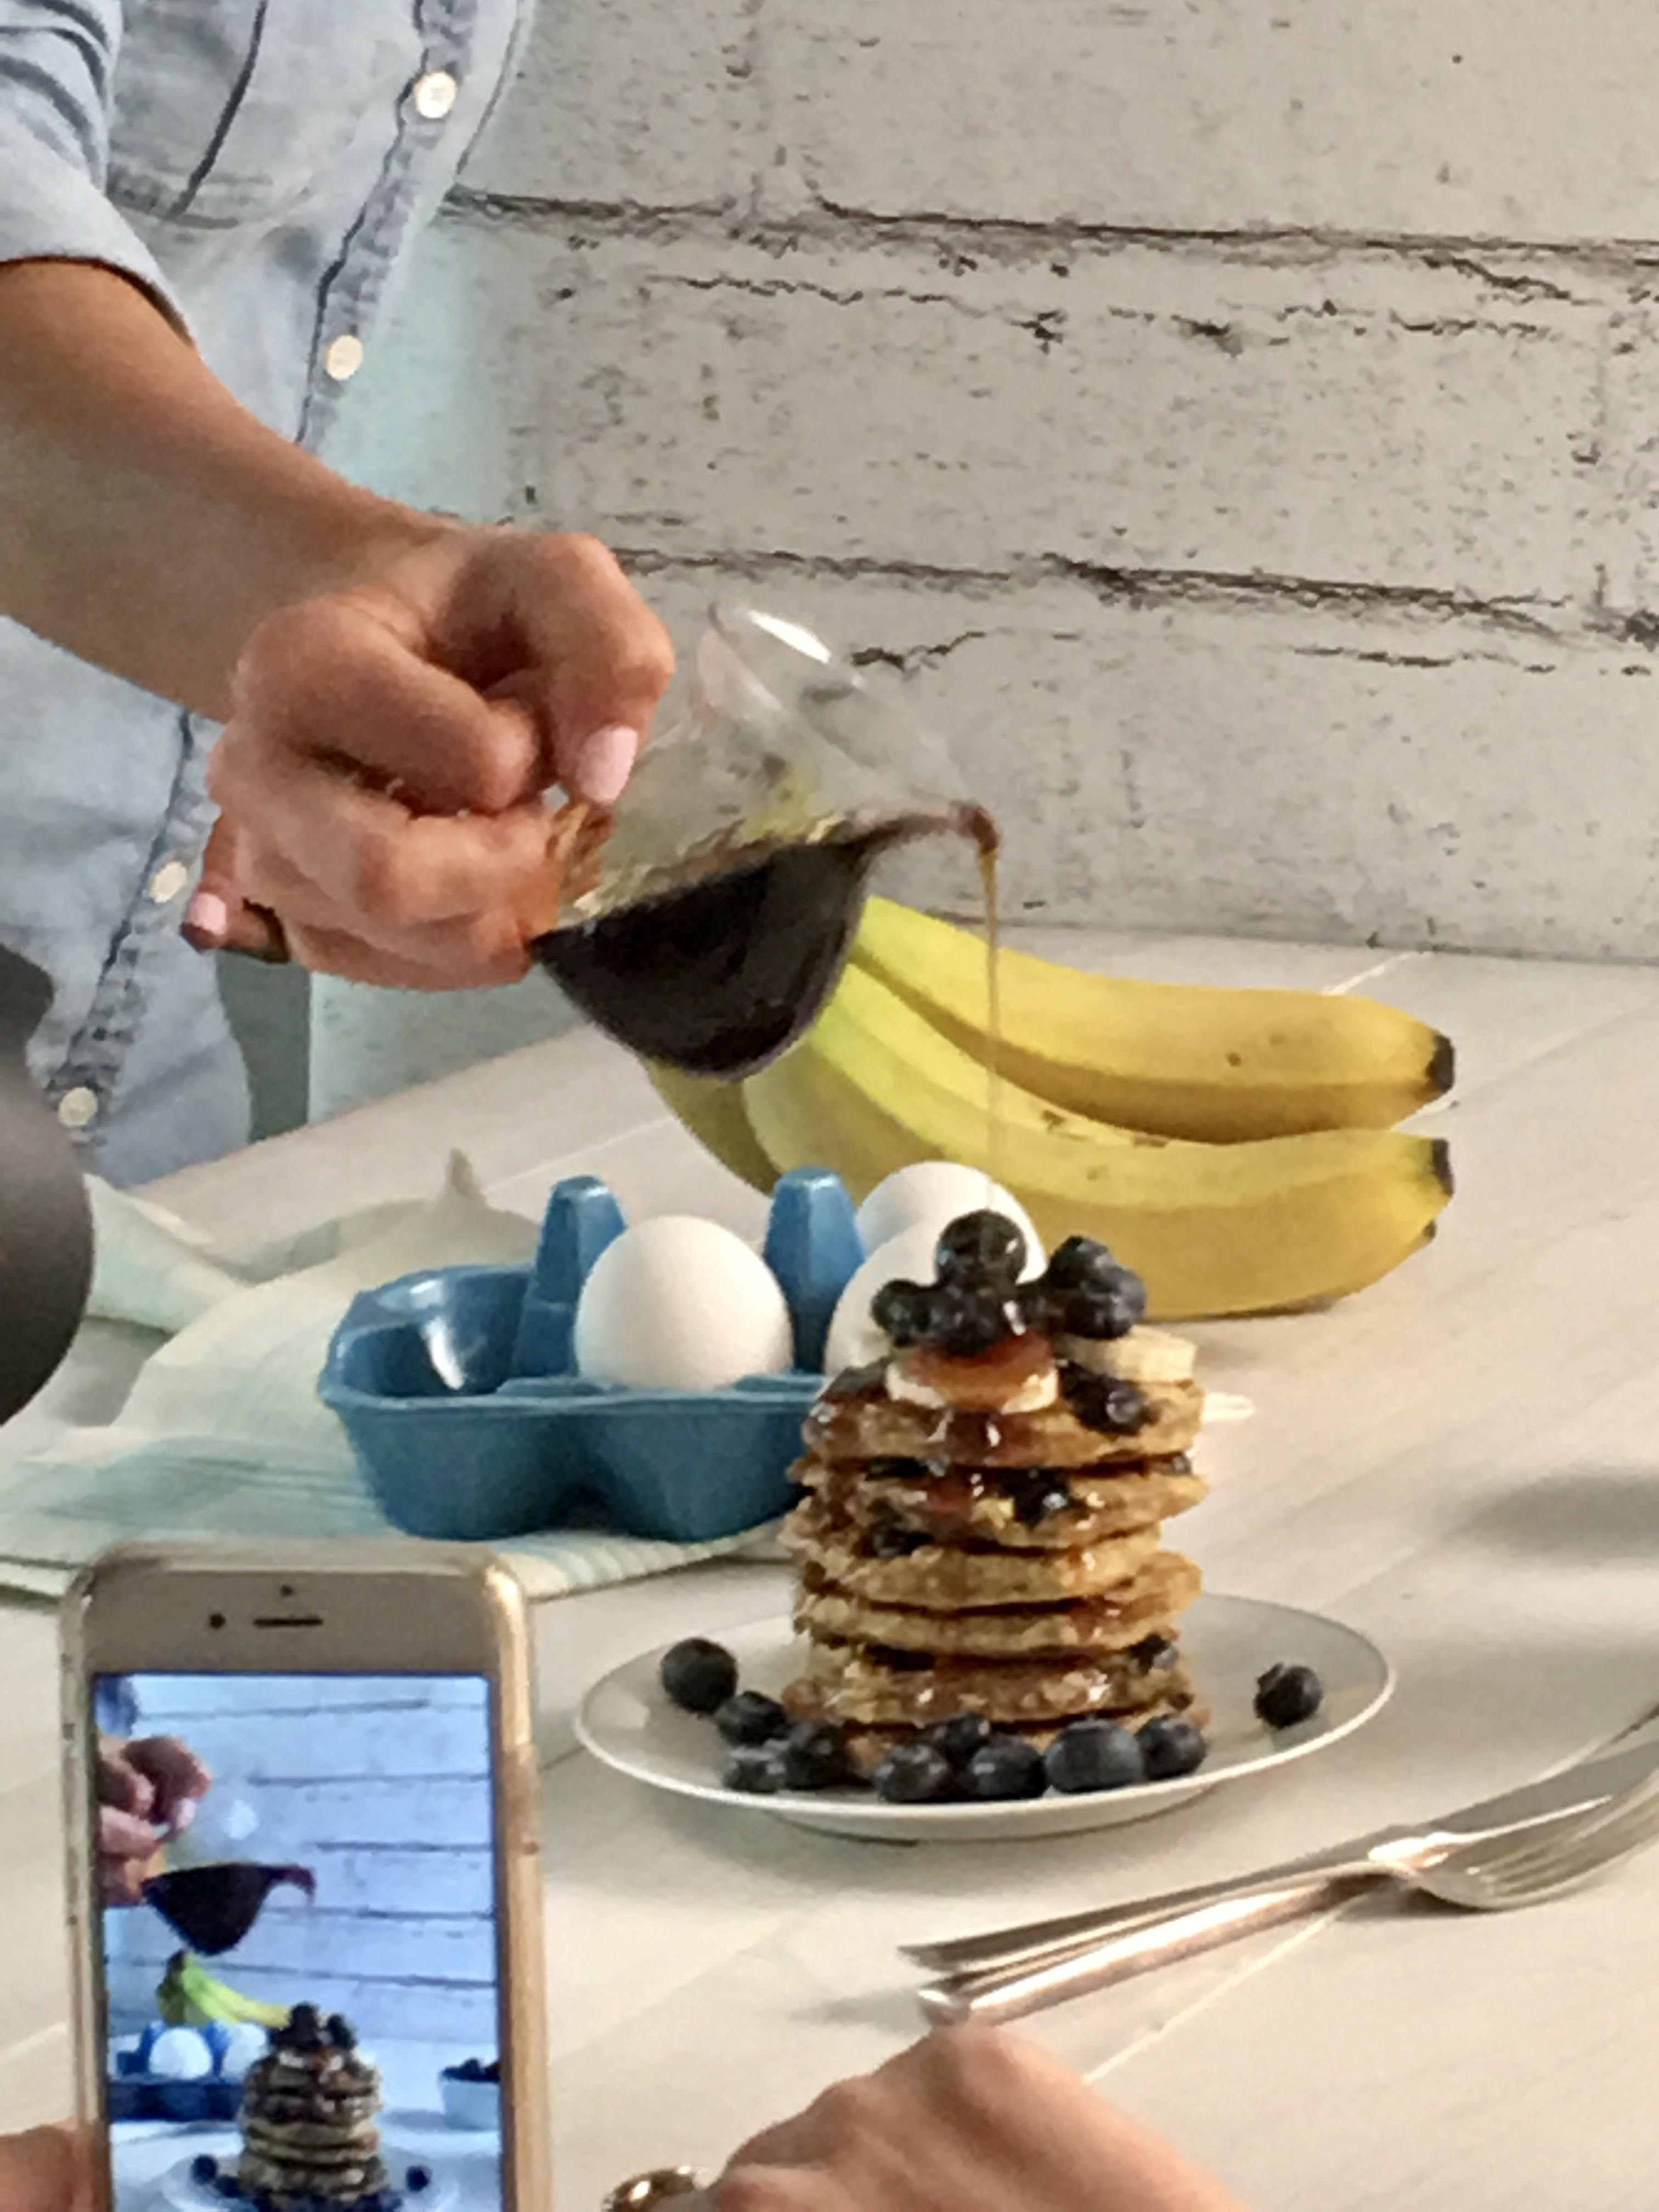 Action shot of pouring syrup over Gluten Free Blueberry Pancakes at photo shoot.